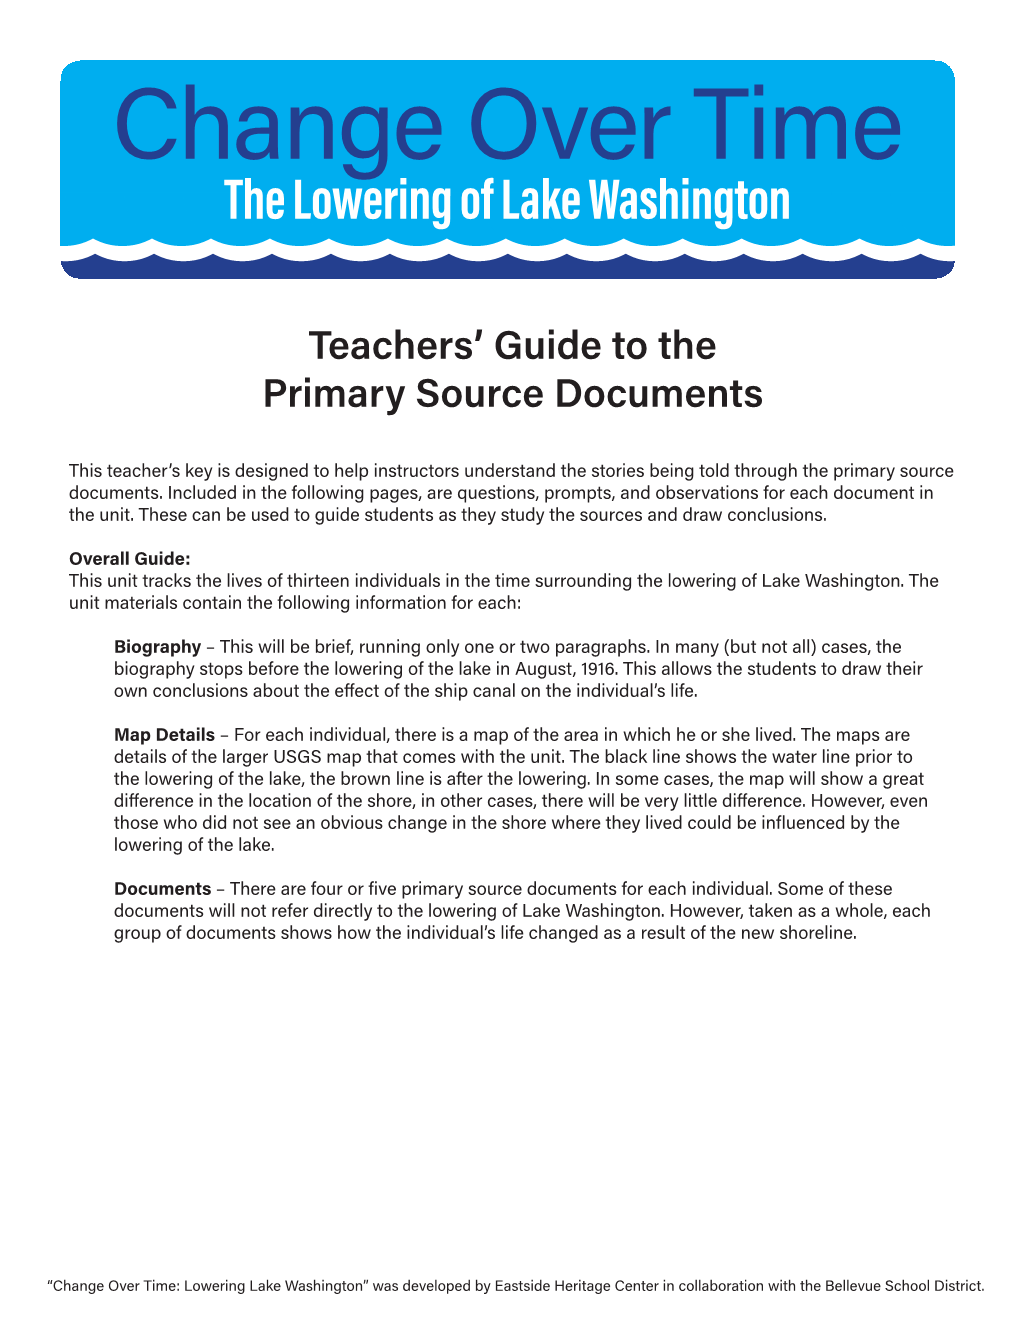 Teacher's Guide to Primary Source Documents